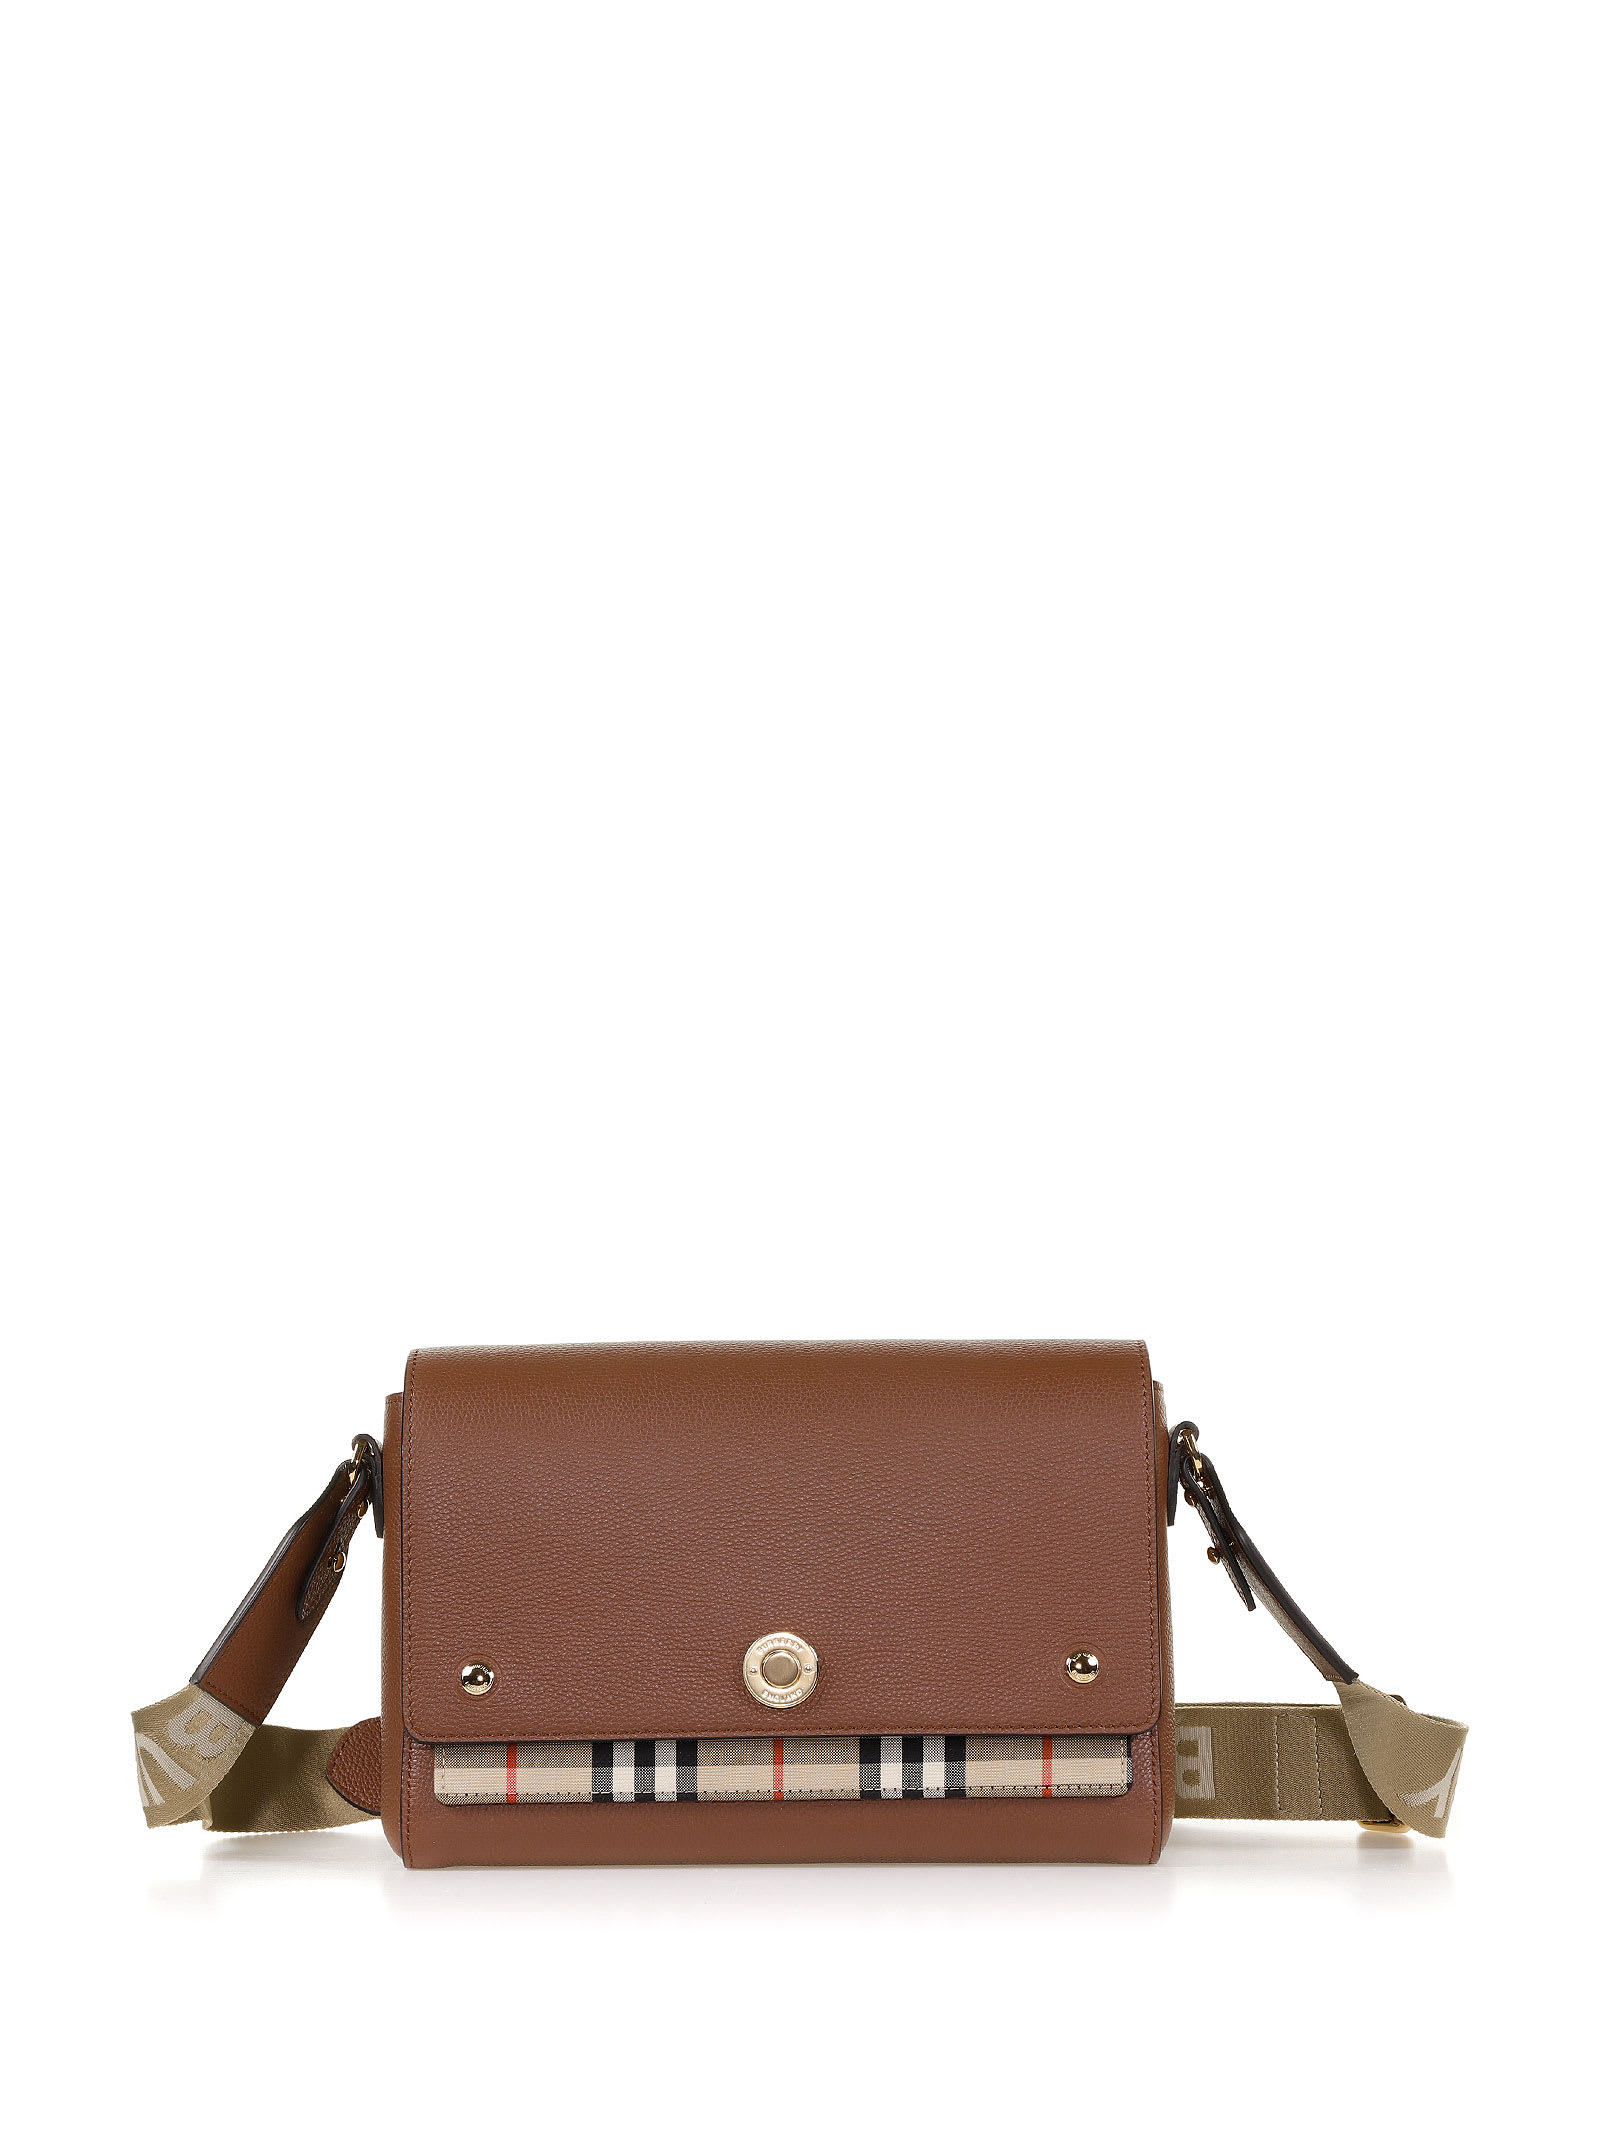 Burberry Crossbody Bag With Vintage Check Pattern